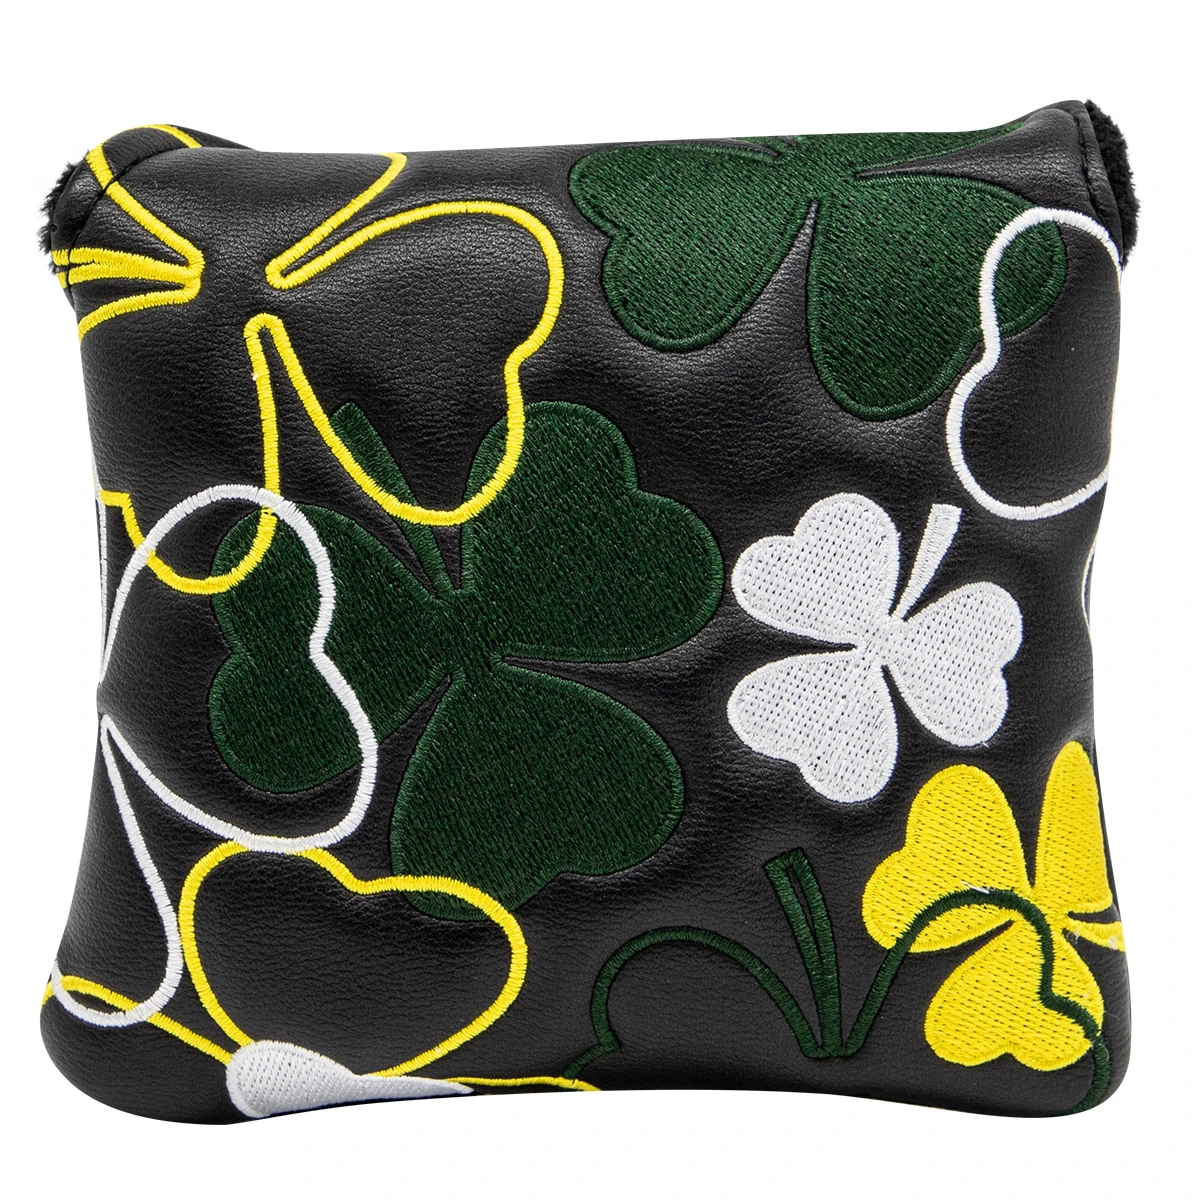 

Golf Mallet Putter Cover Golf Club Head Cover for Putter Premium PU Leather Clover Design Magnetic Closure